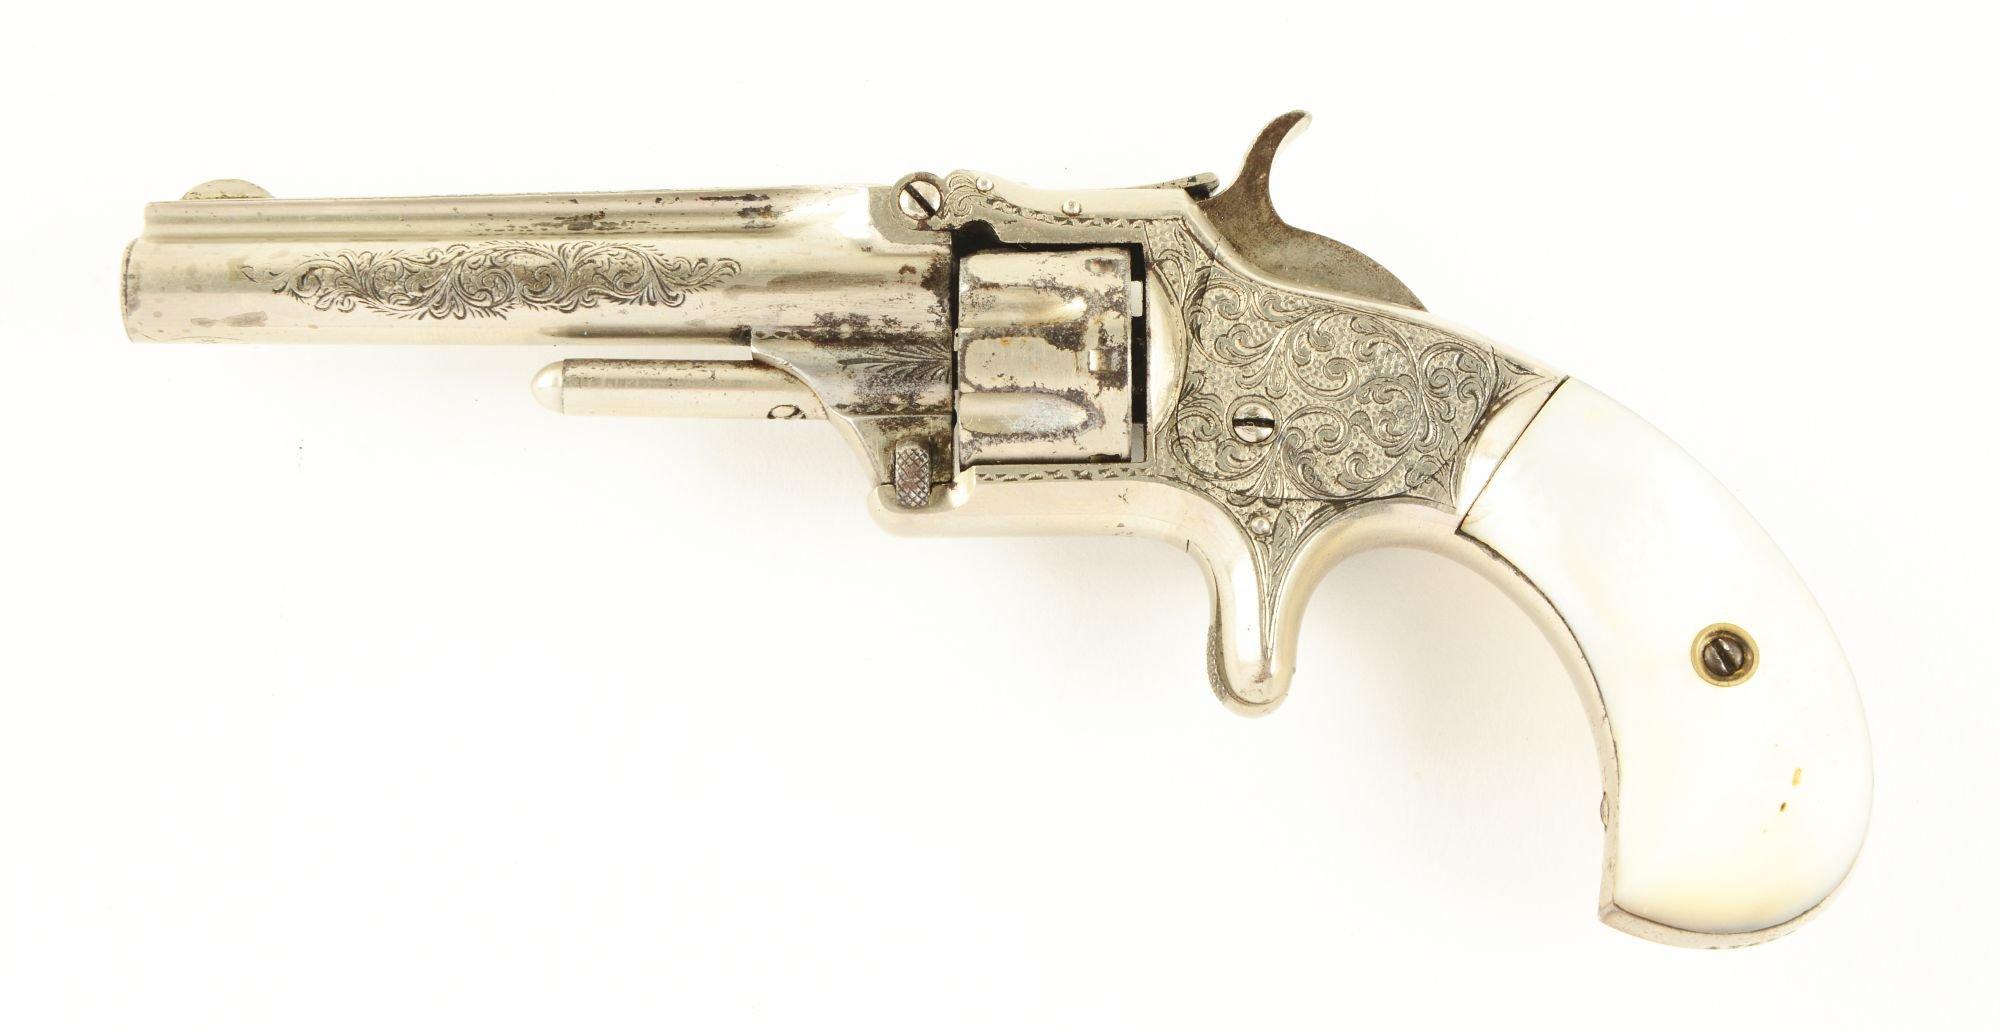 (A) Factory Engraved & Cased S&W No. 1 Single Action Revolver.